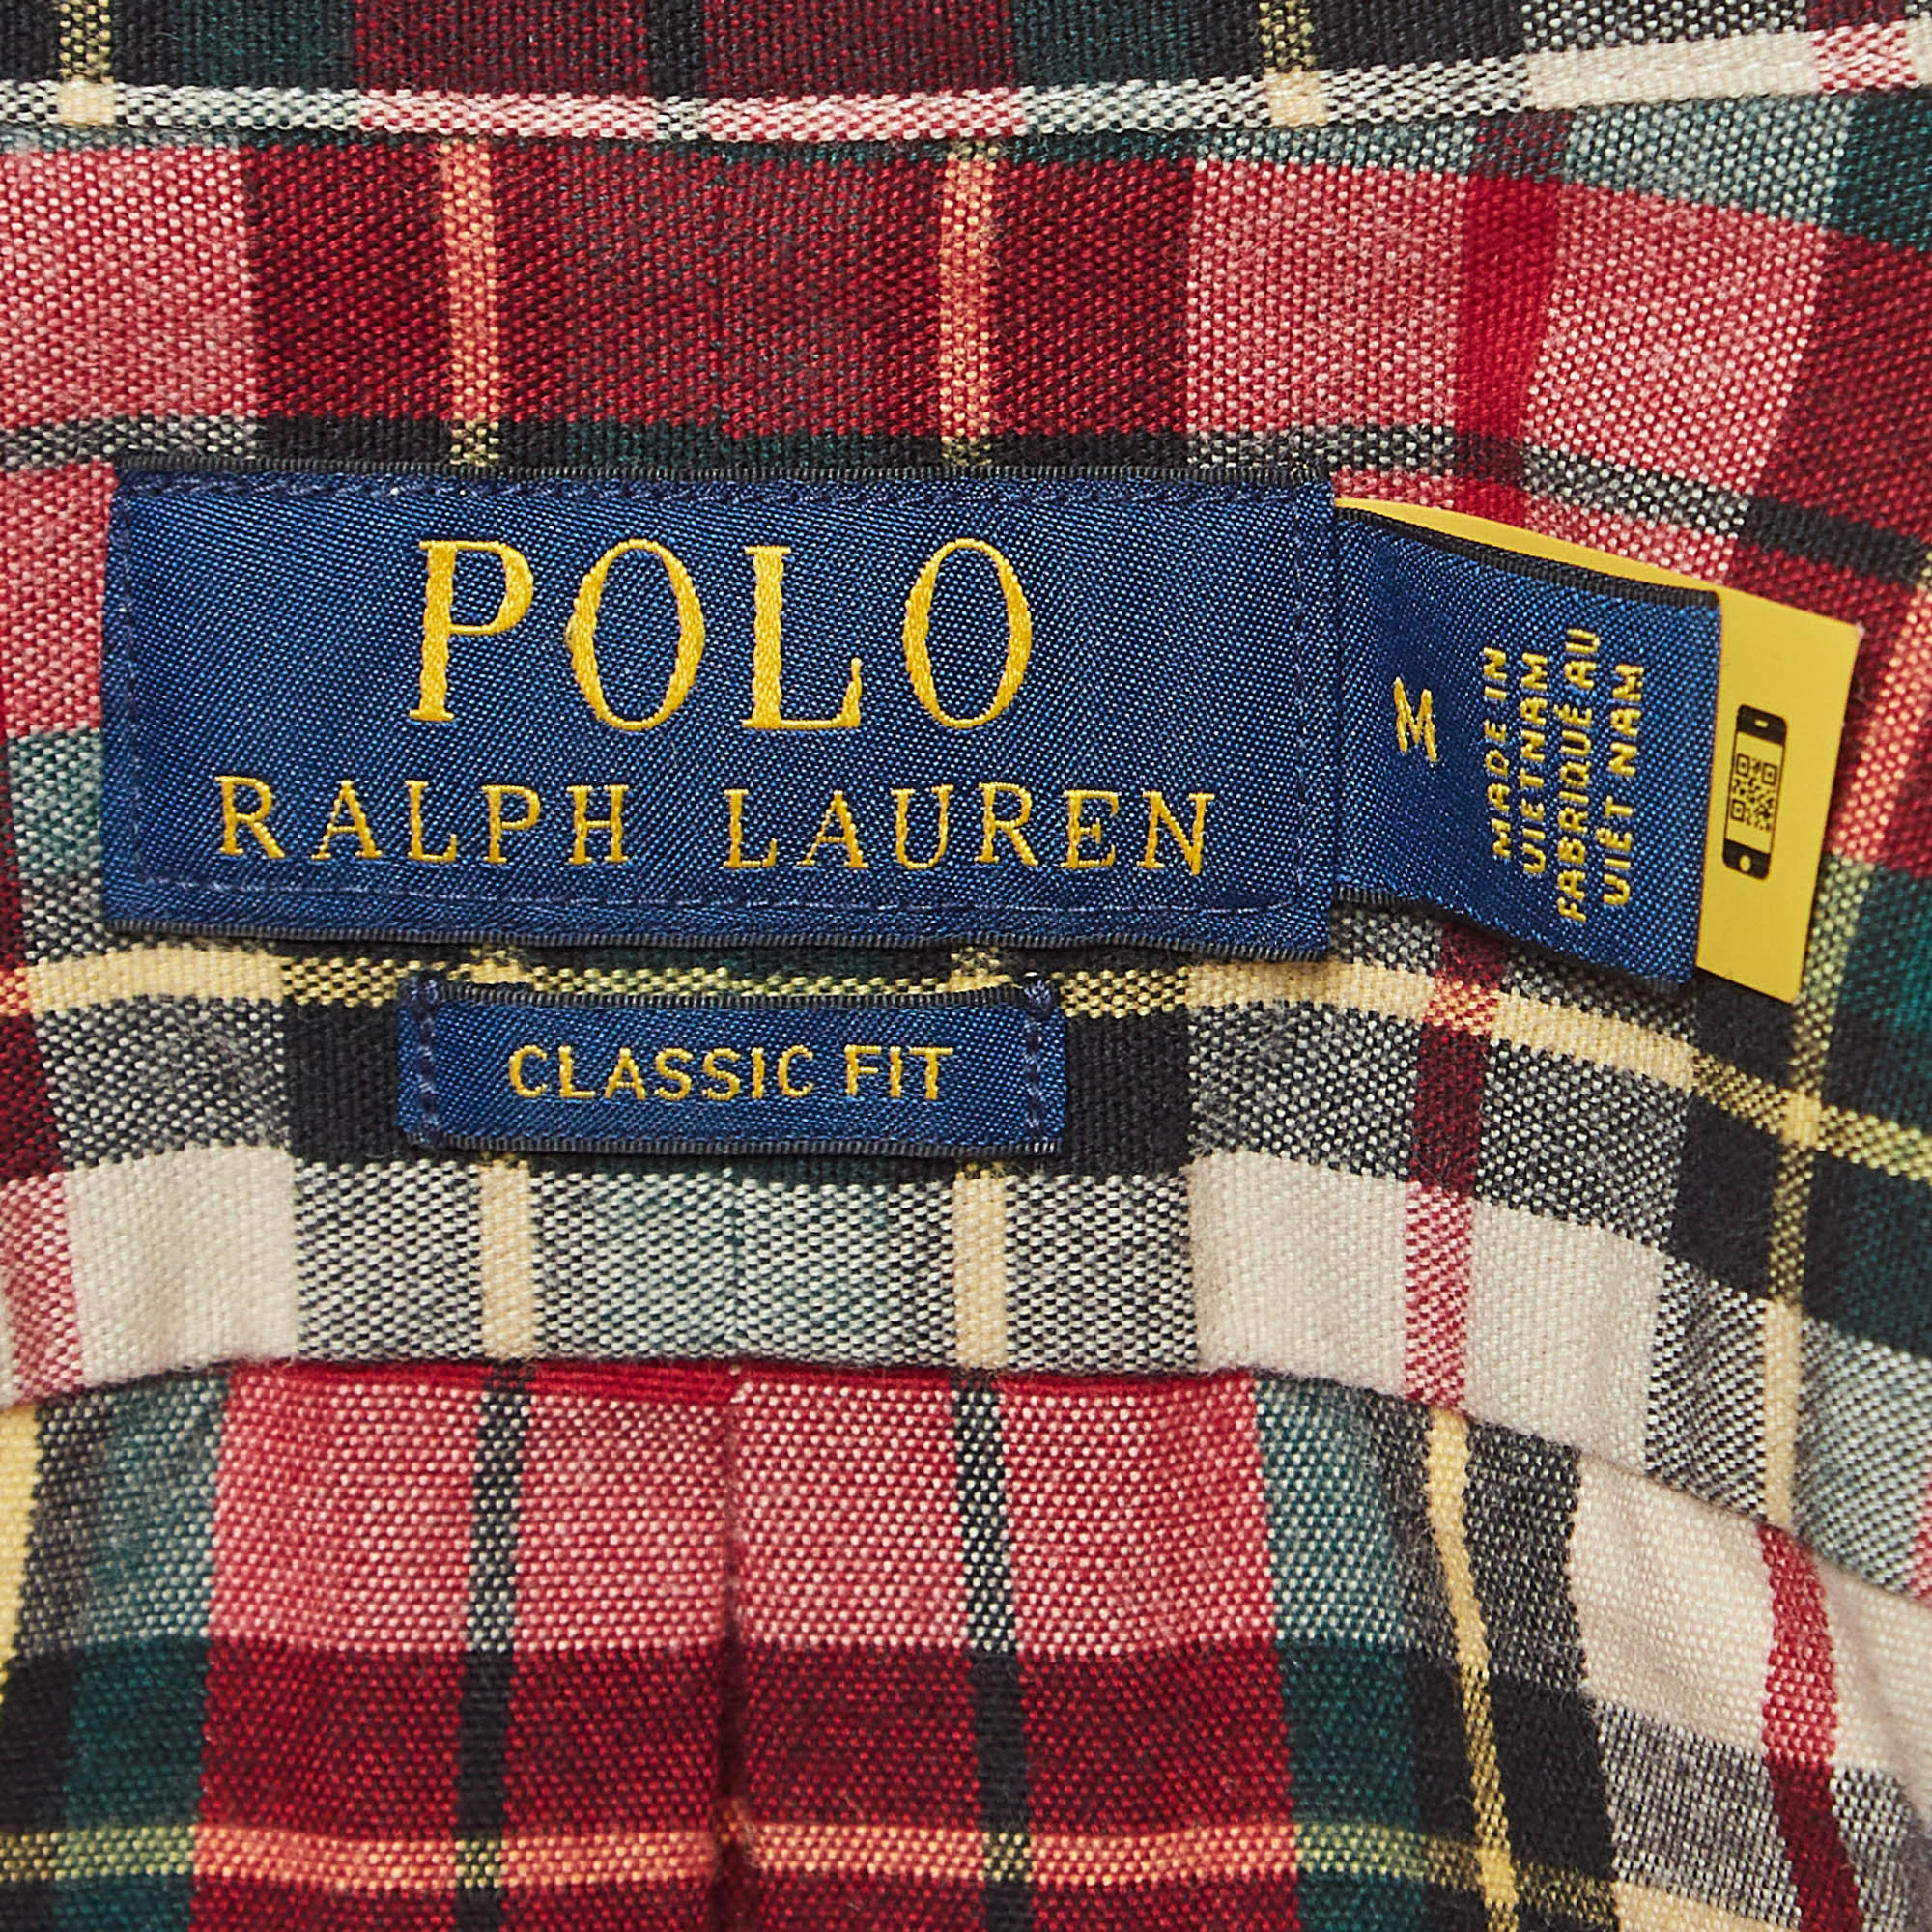 Polo Ralph Lauren Red Checked Cotton Flannel Shirt M